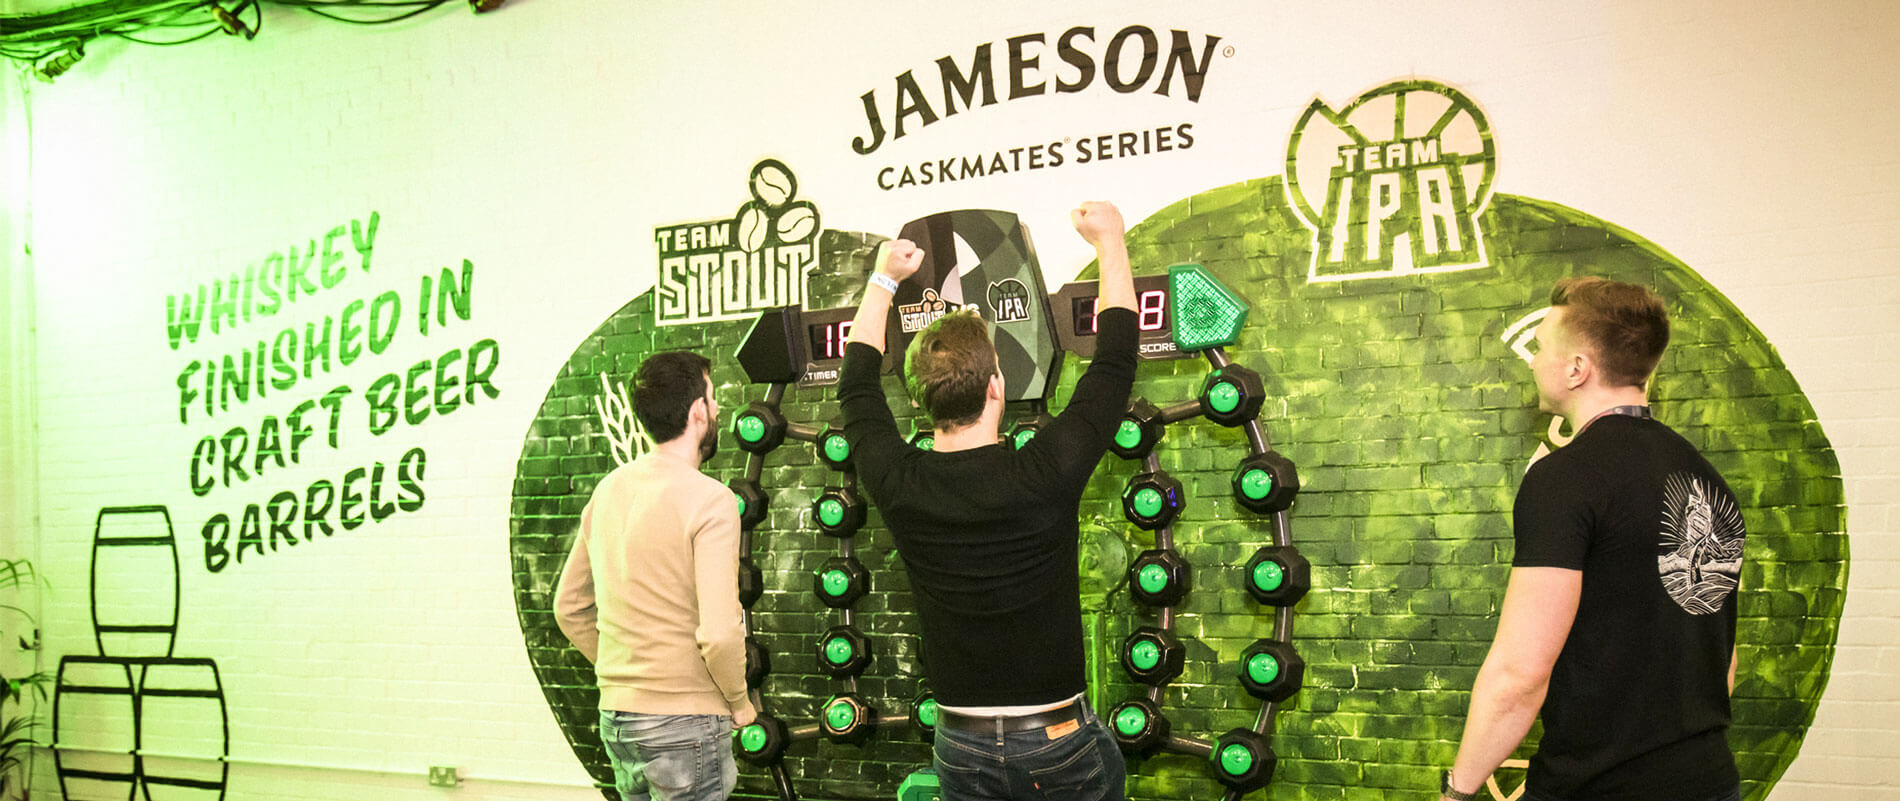 branded speed of light reaction arcade game for hire at Jameson Irish Whiskey trade show event